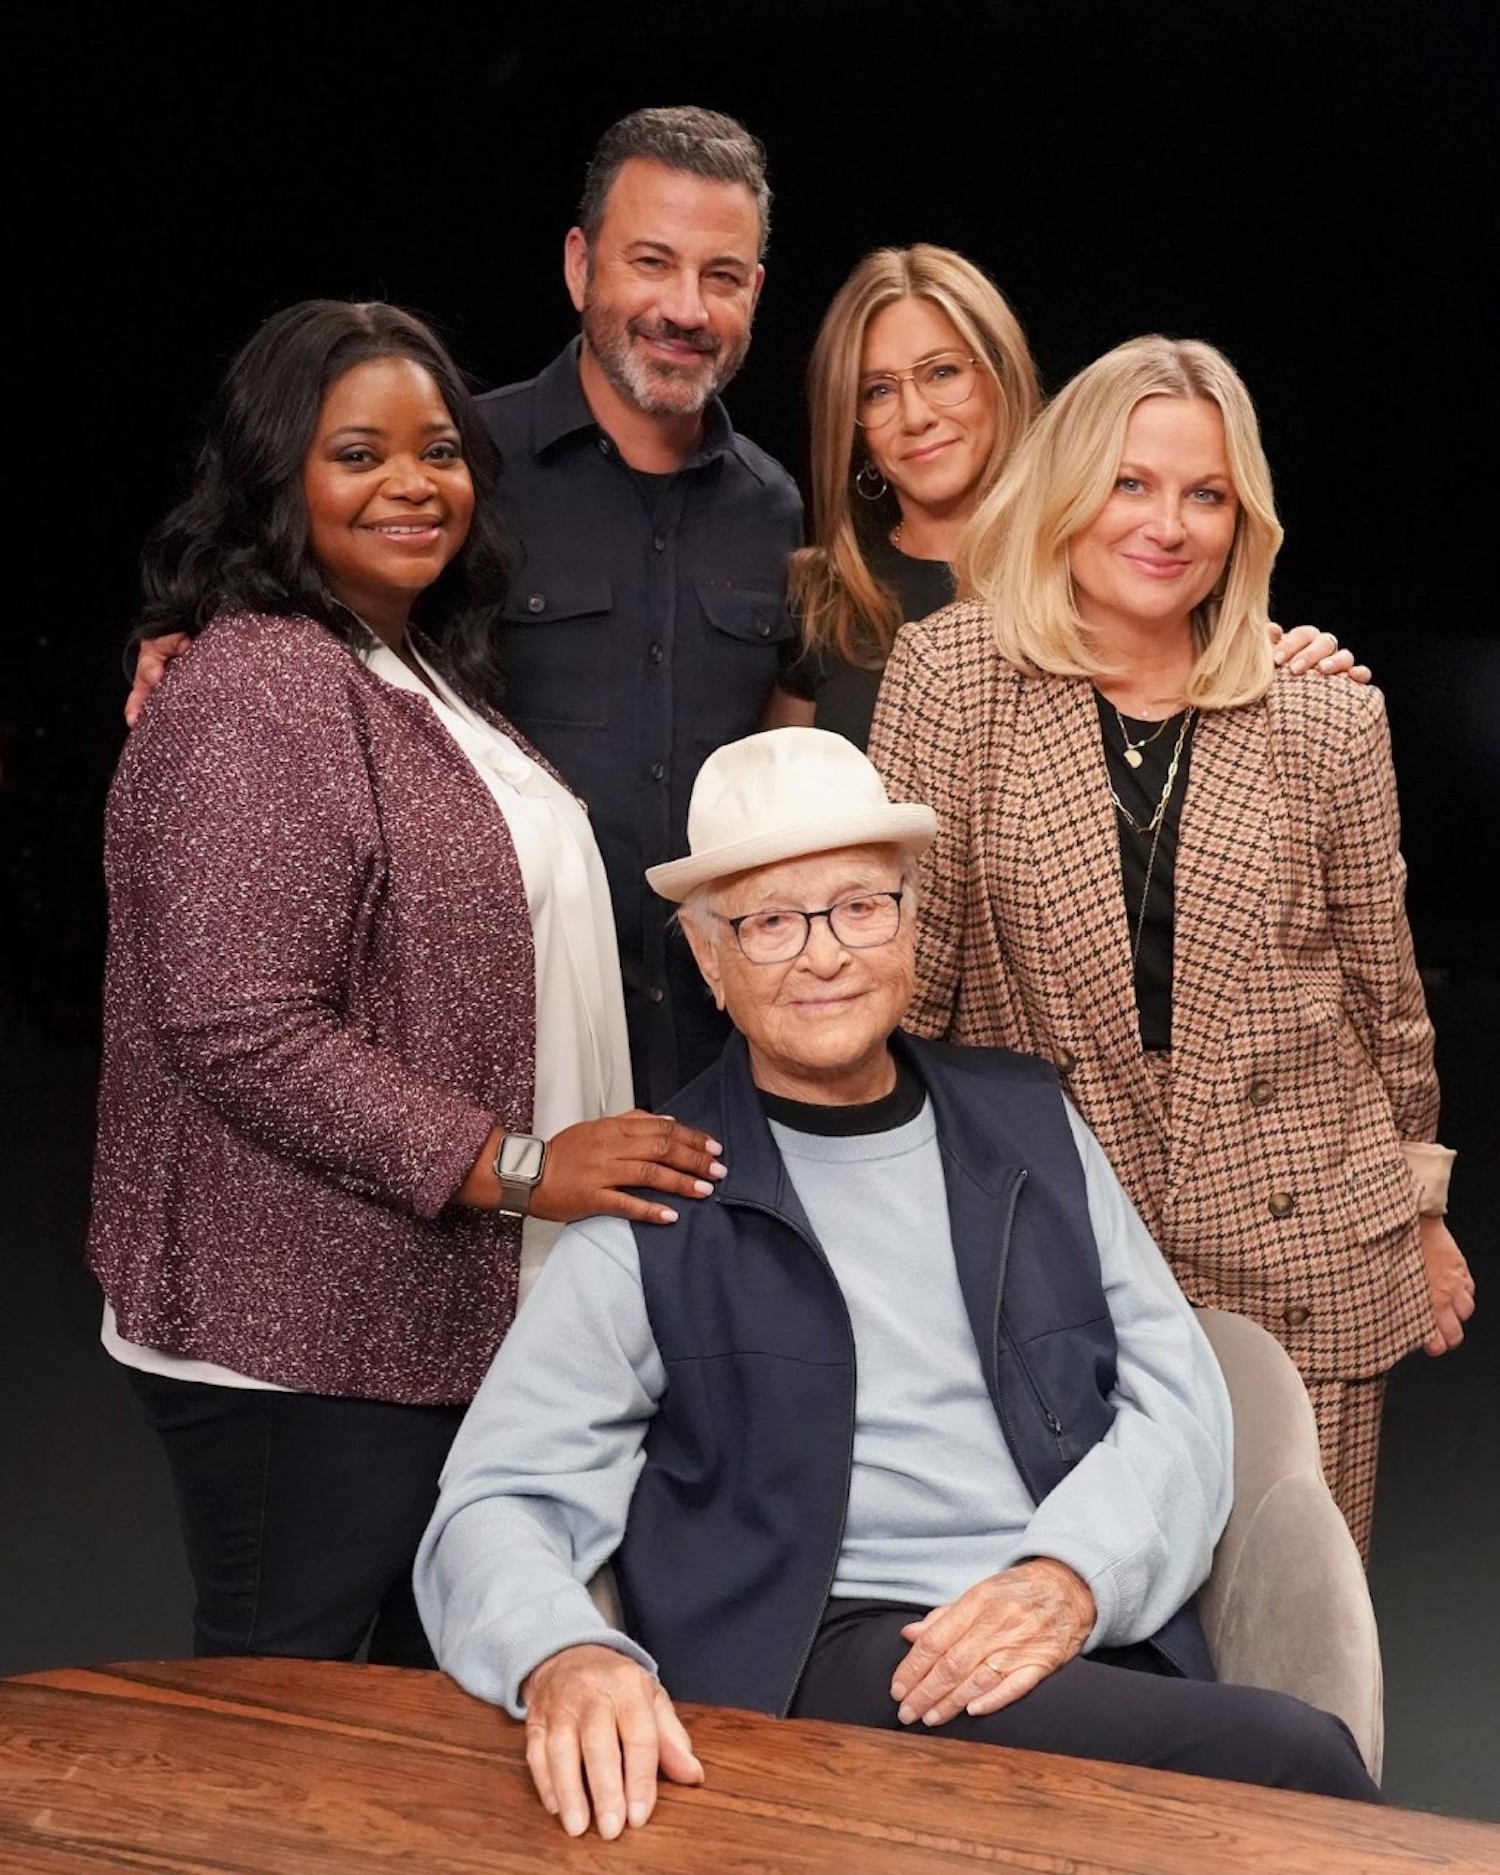 Octavia Spencer, Norman Lear, Amy Poehler, Jimmy Kimmel and Jennifer Aniston for Norman Lear 100th birthday ABC special